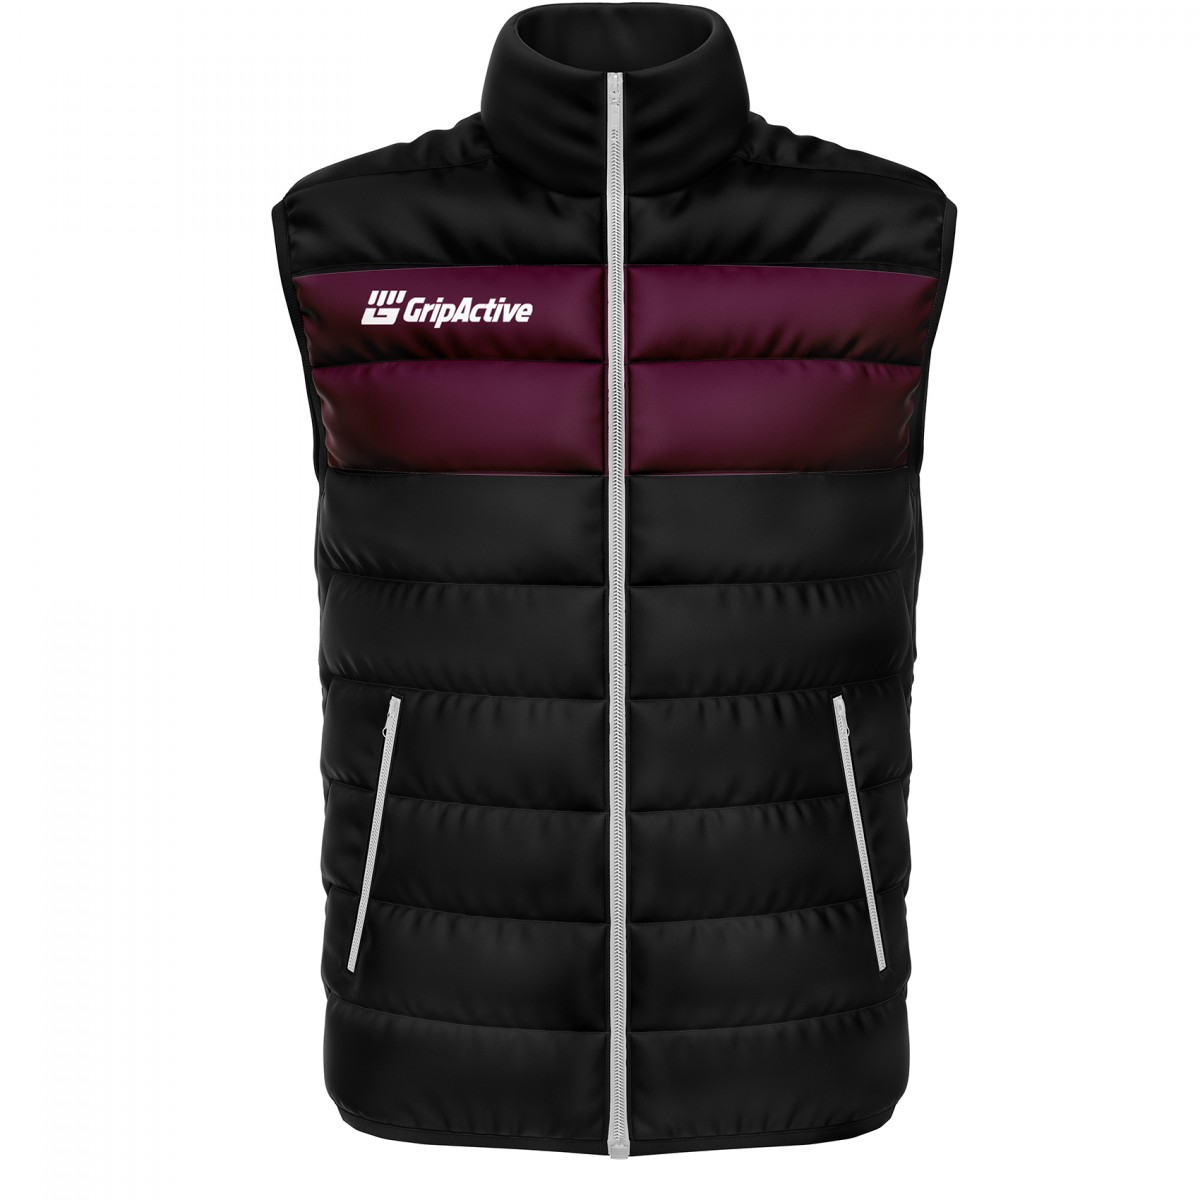 Grip Active Maroon And Black Colour Gilet